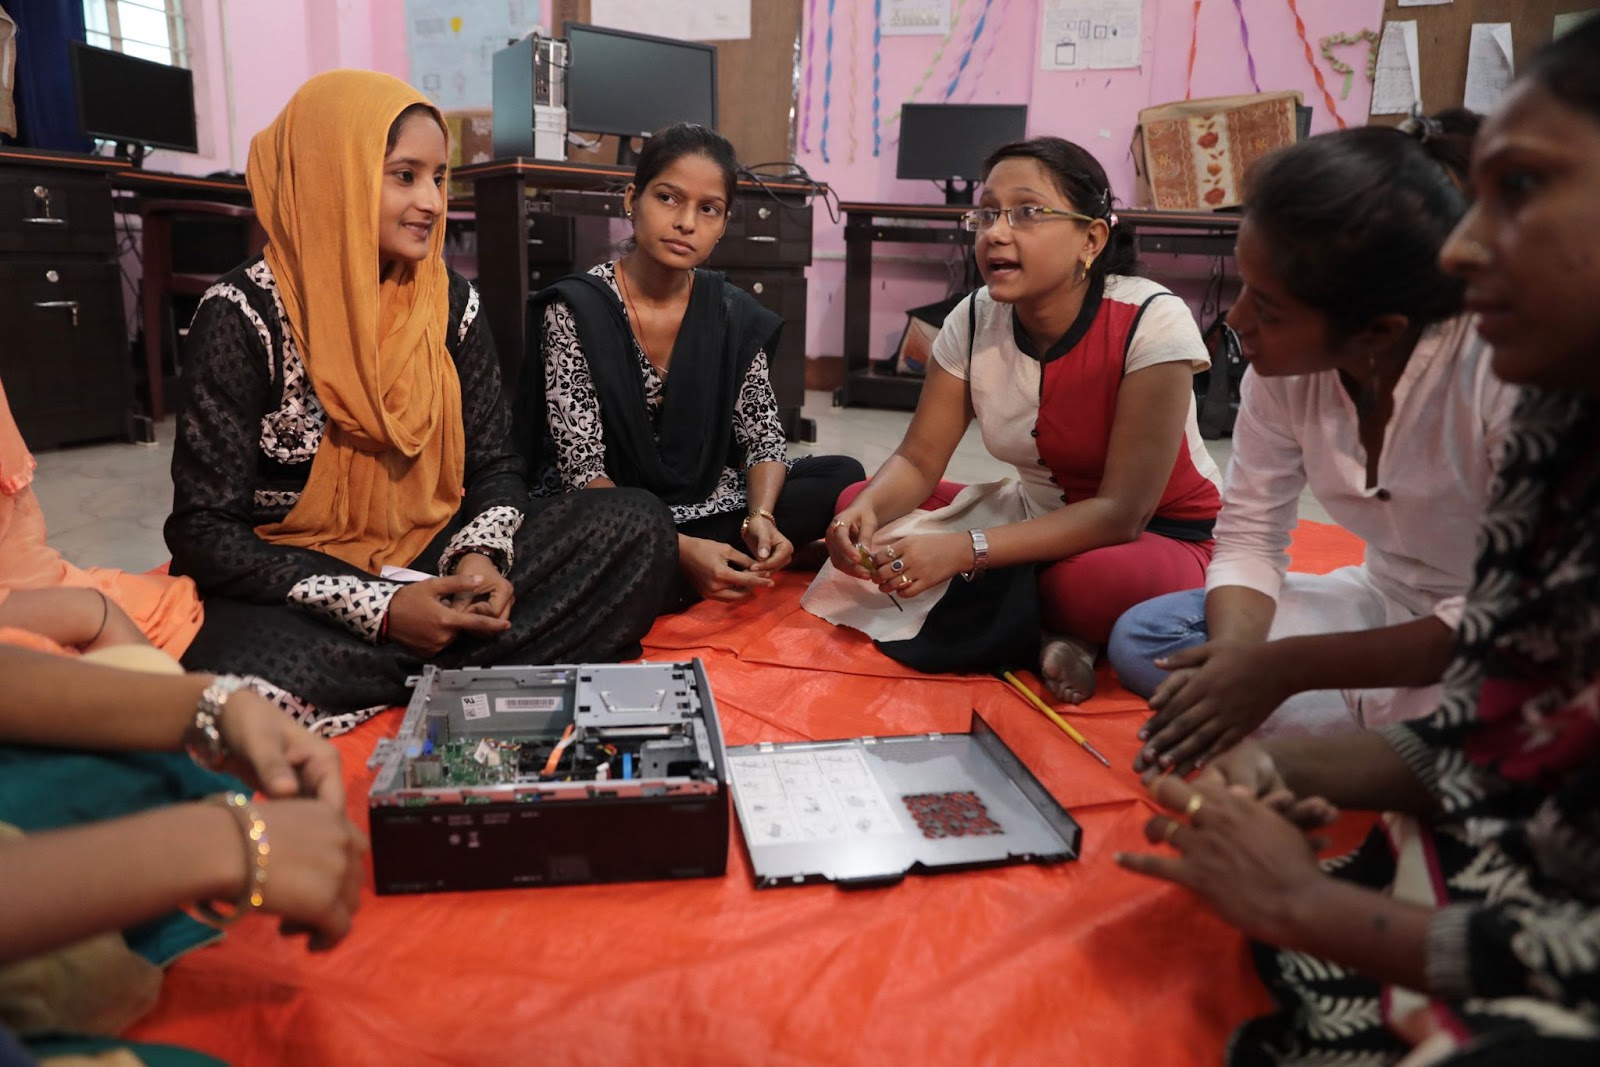 A group of women sit in a circle discussing computer hardware equipment. A few wear traditional Indian clothing.